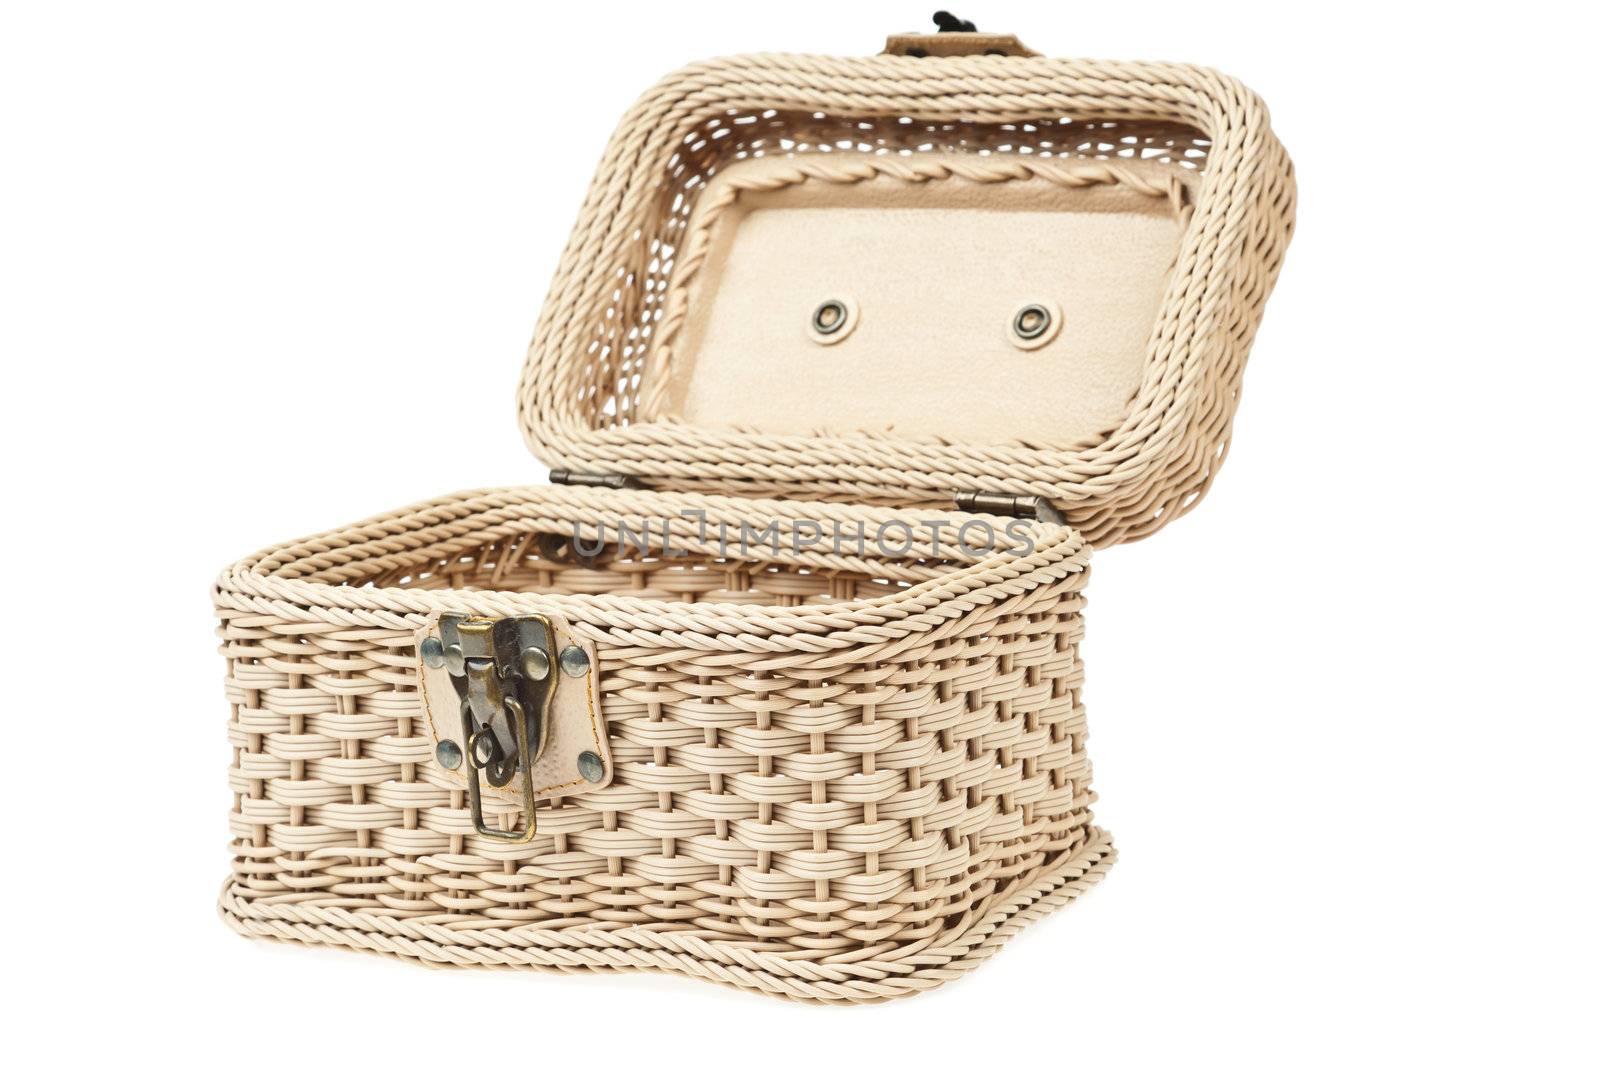 Basket, plastic wicker with protector